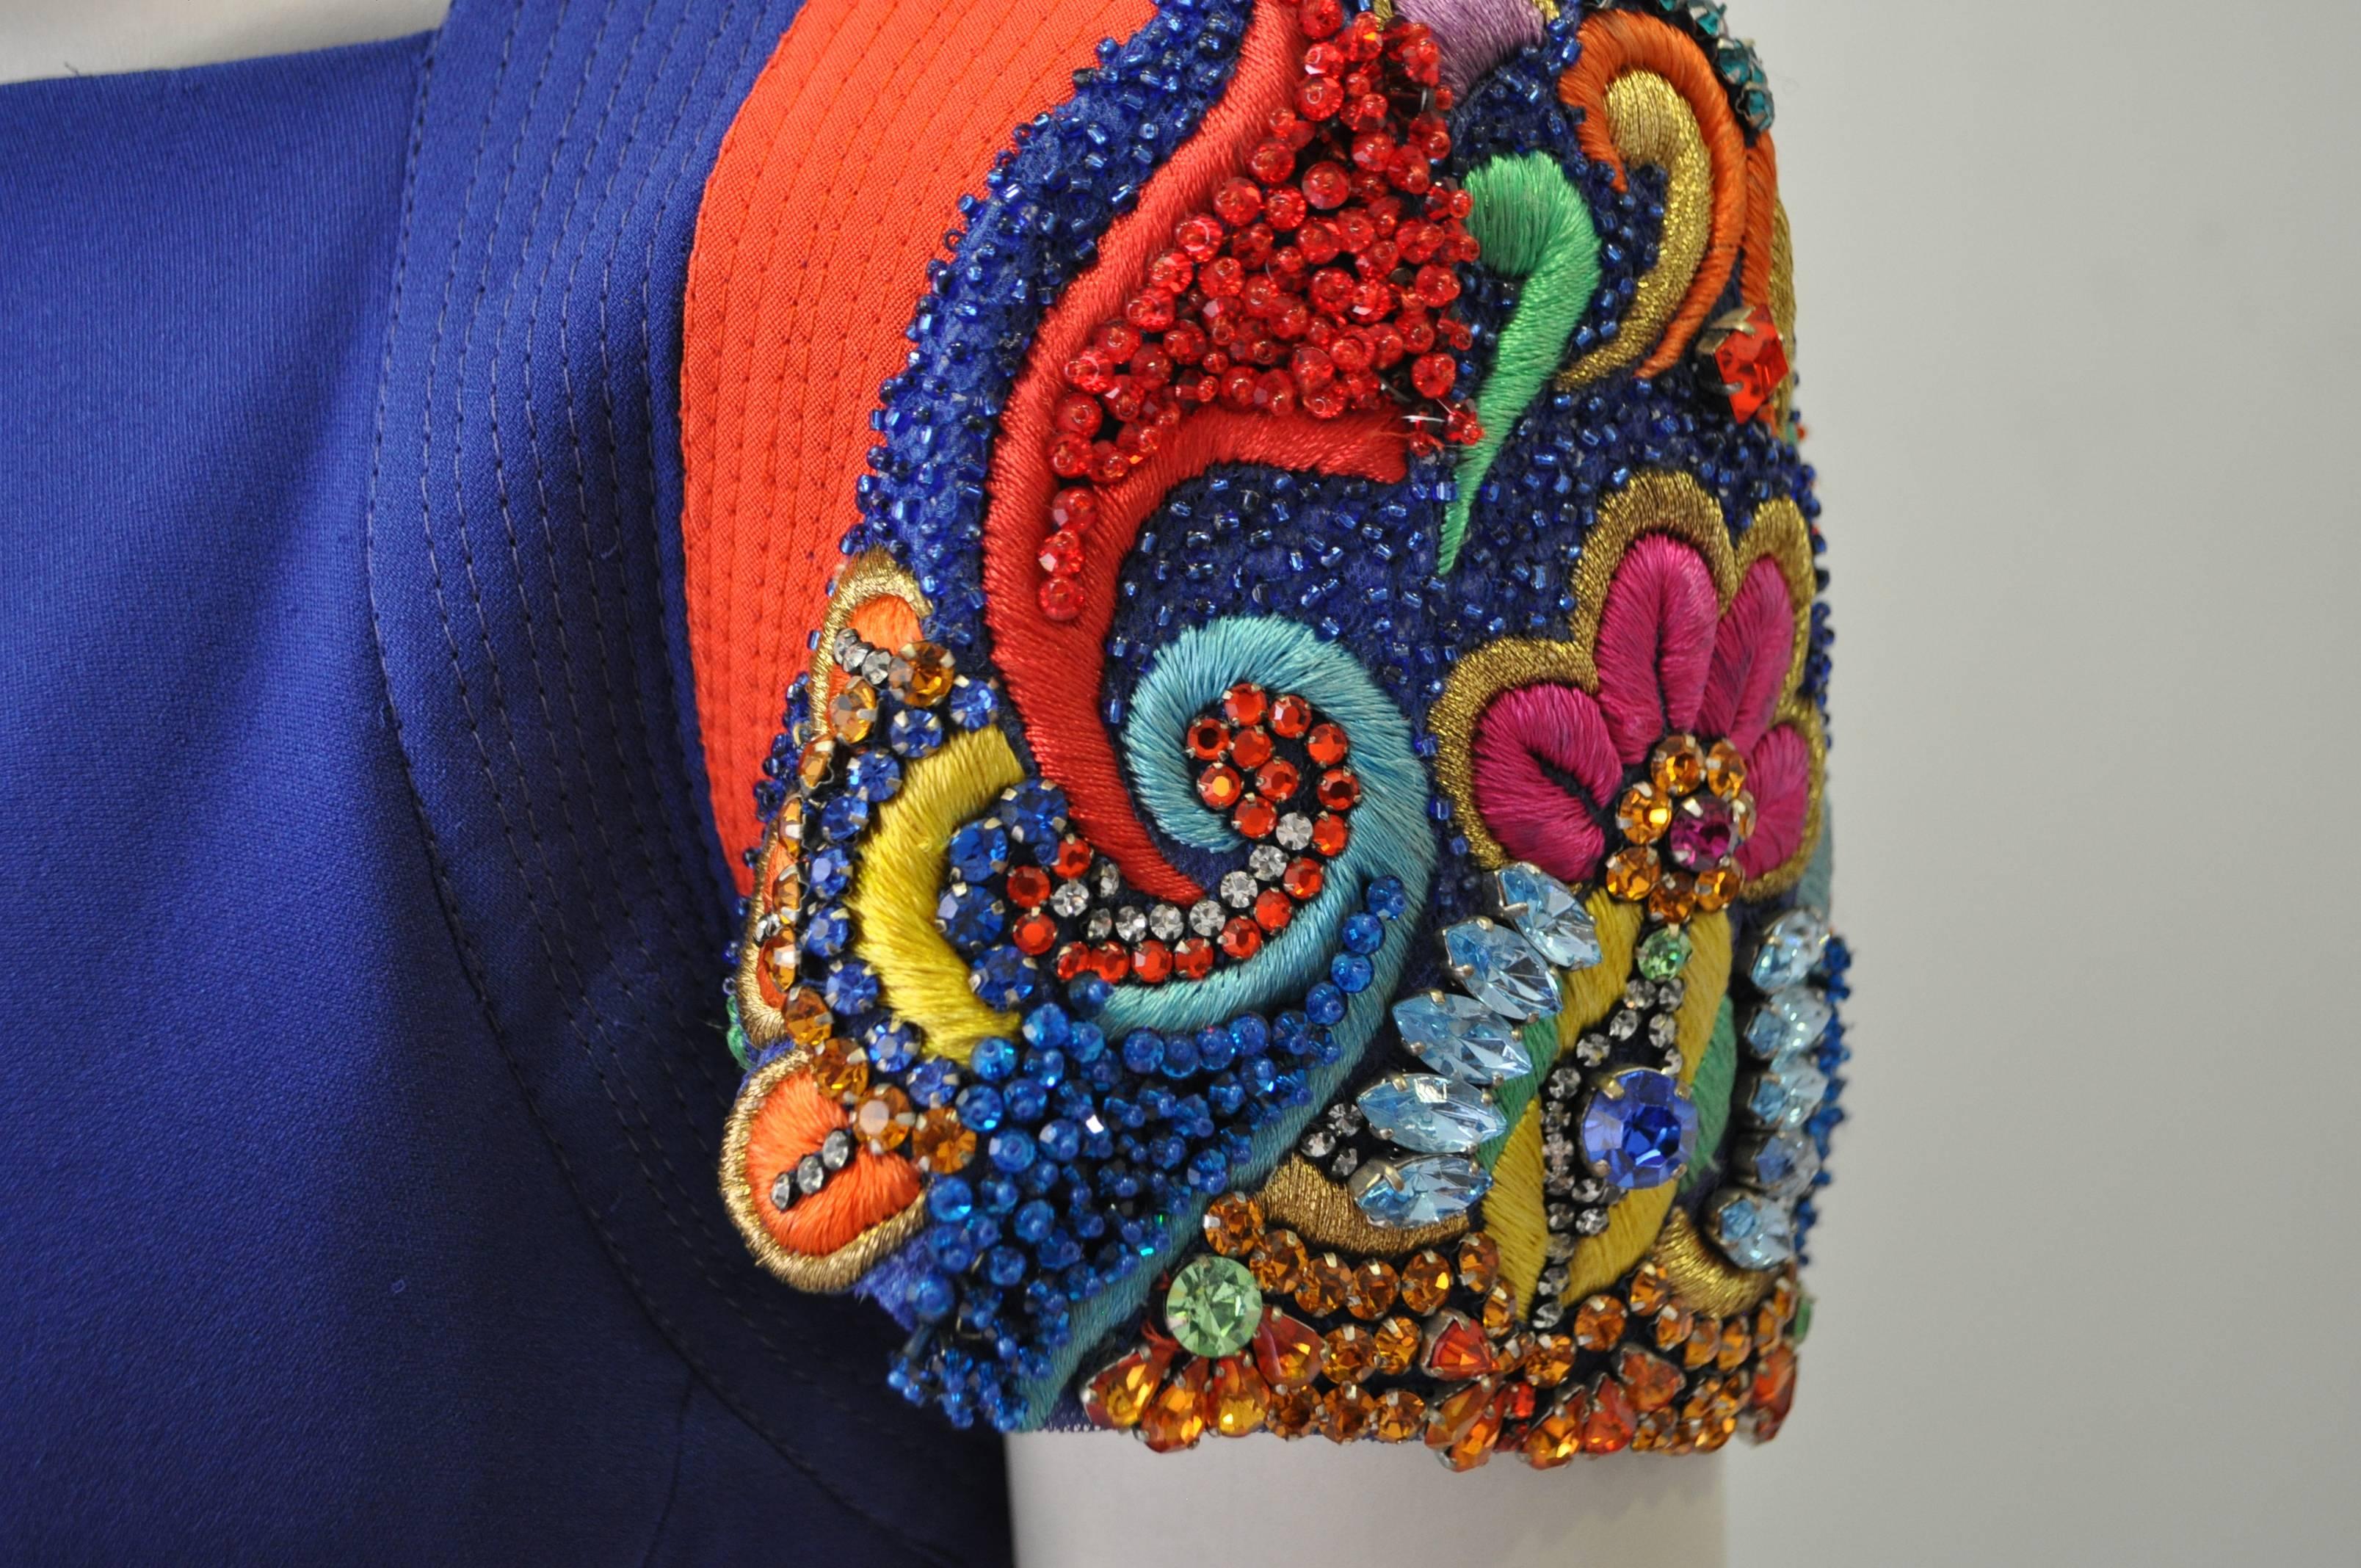 Women's Exceptional Gianni Versace Couture Embroidered Beaded Jacket For Sale